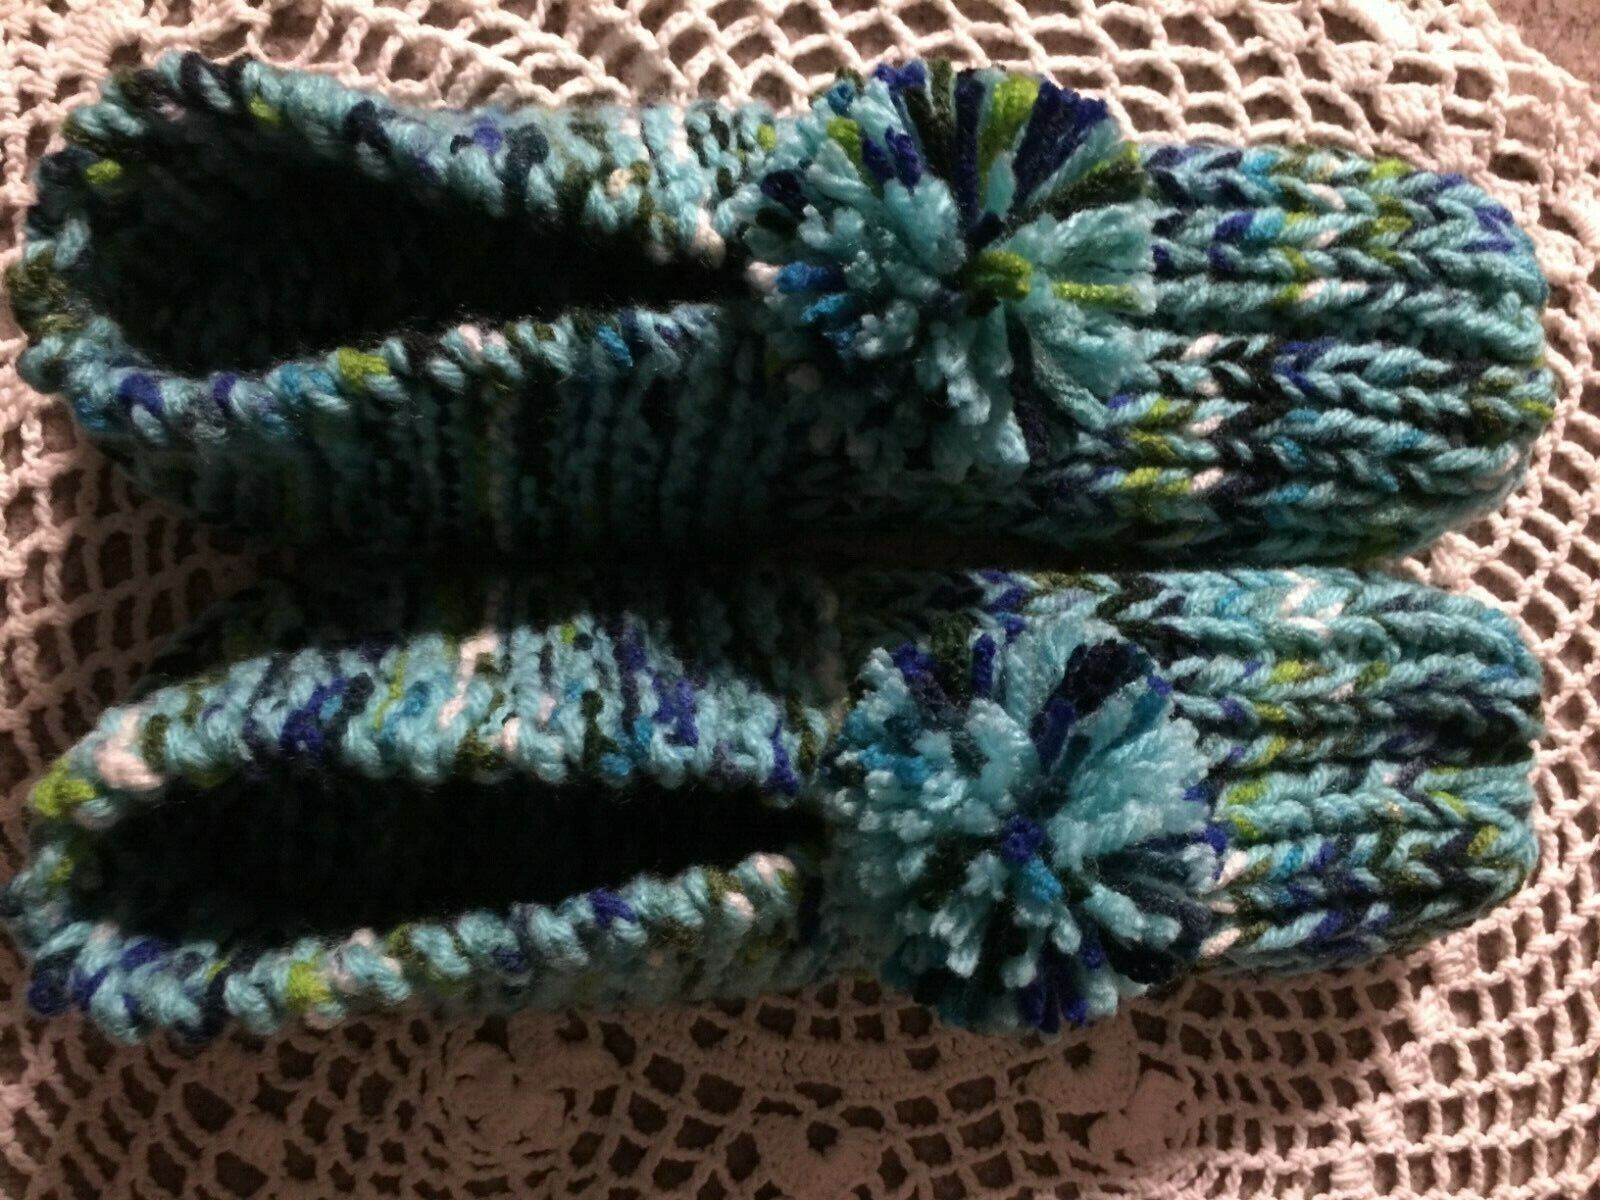 New Handmade Knit Amish Slippers Sea Green/blues Mix Wms Lg Mans Med 9 3/4"